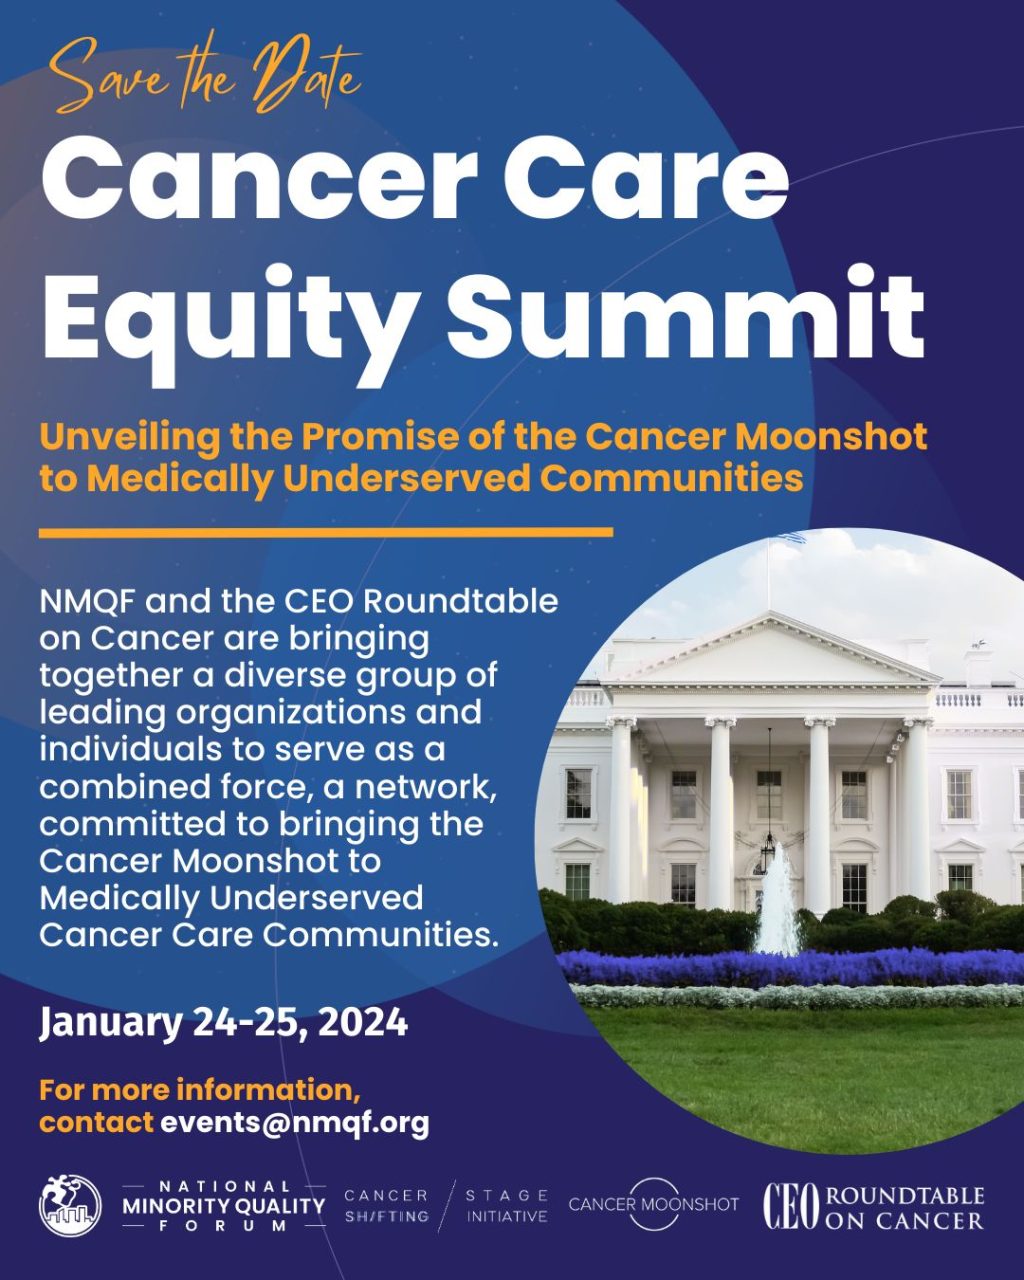 MaryLisabeth Rich: Moonshot inspired Cancer Care Equity Summit